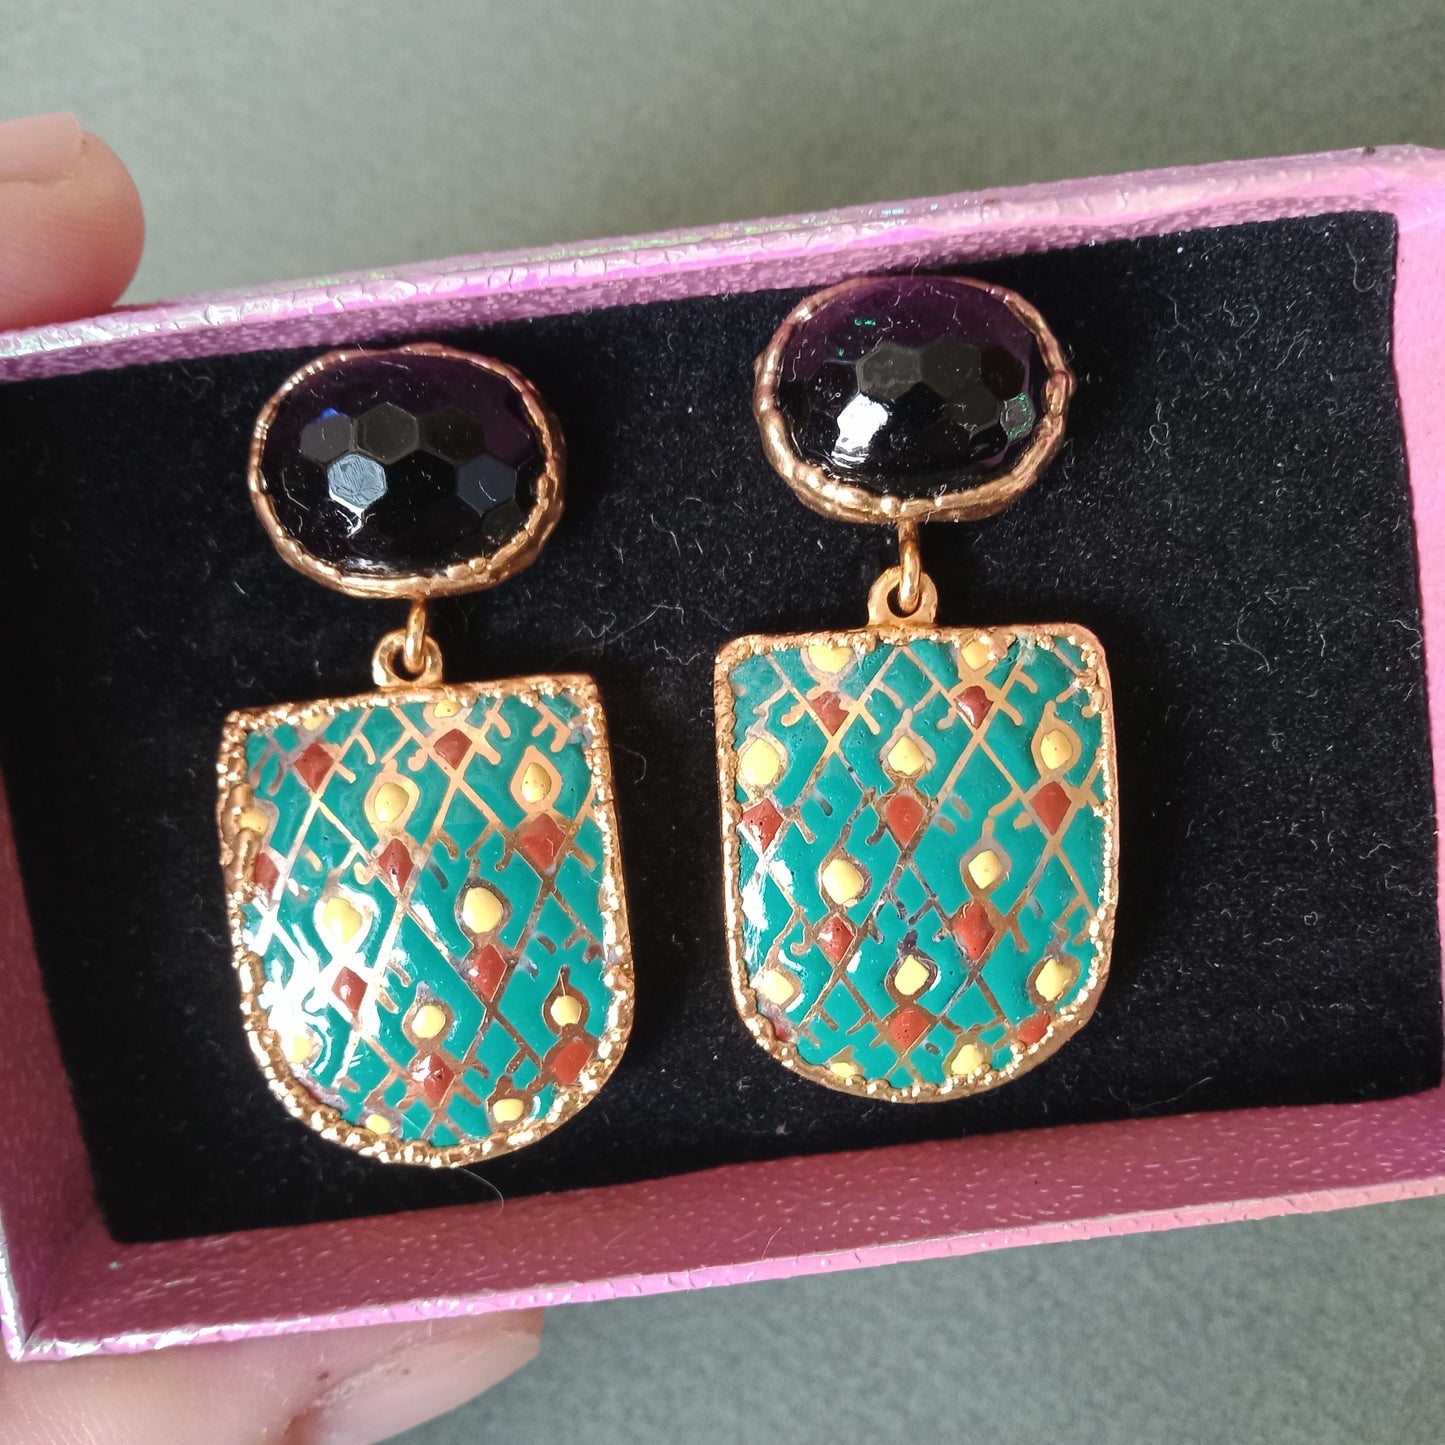 Reserved for Maria. Green diamond pattern ceramic earrings with onyx studs